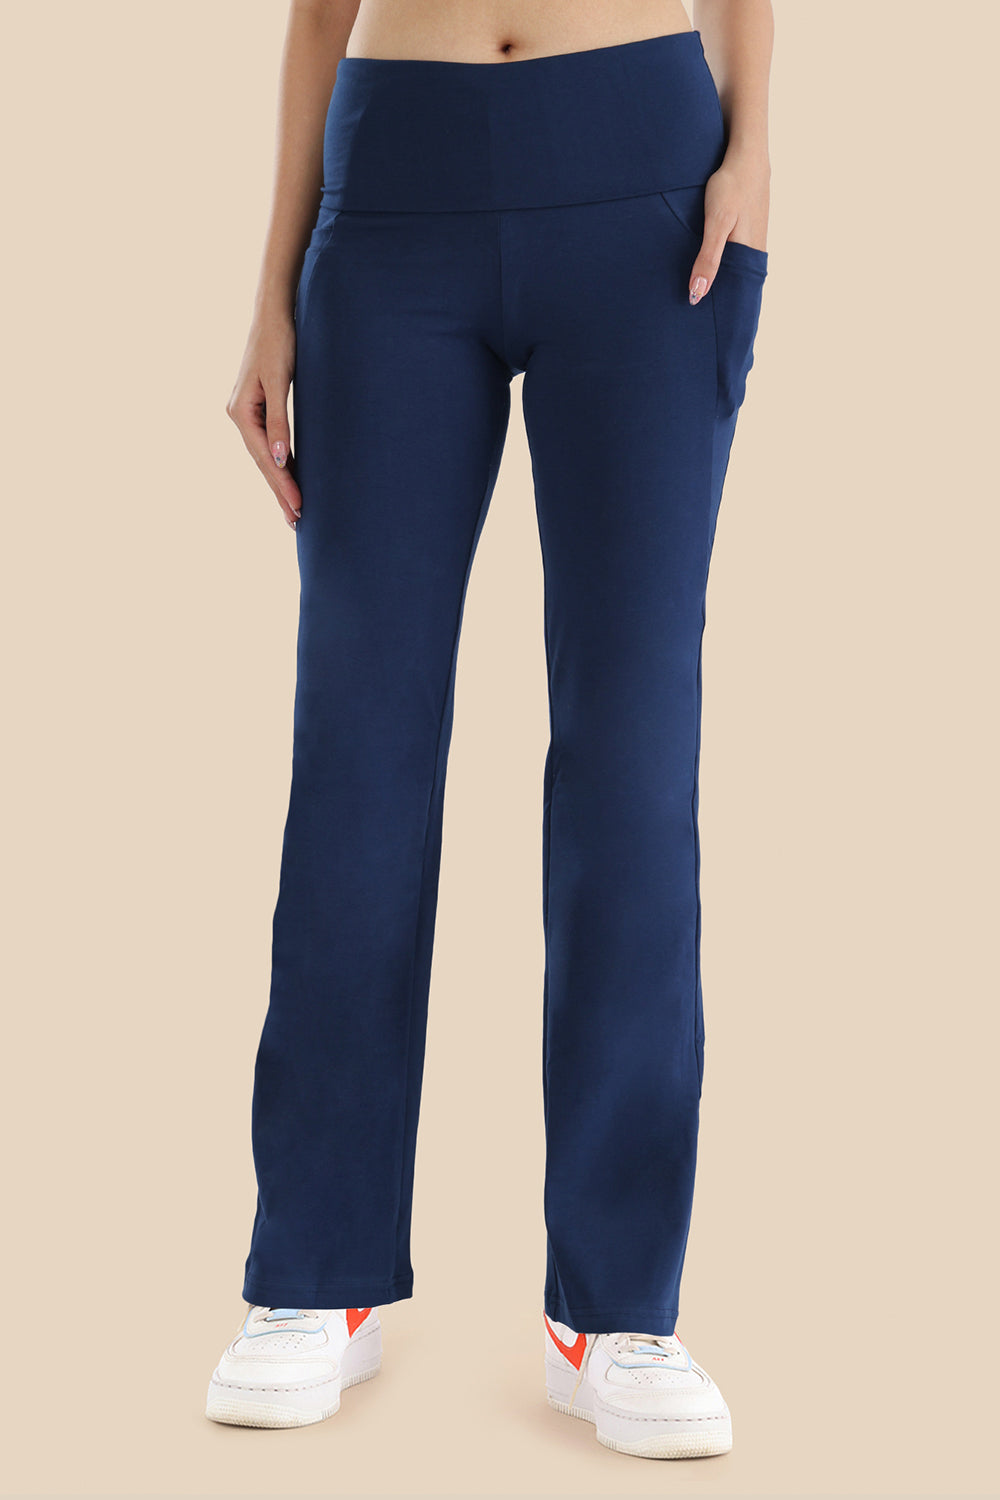 Trackpants Shop Women Navy BlueWhite Cotton Trackpants Online  Cliths